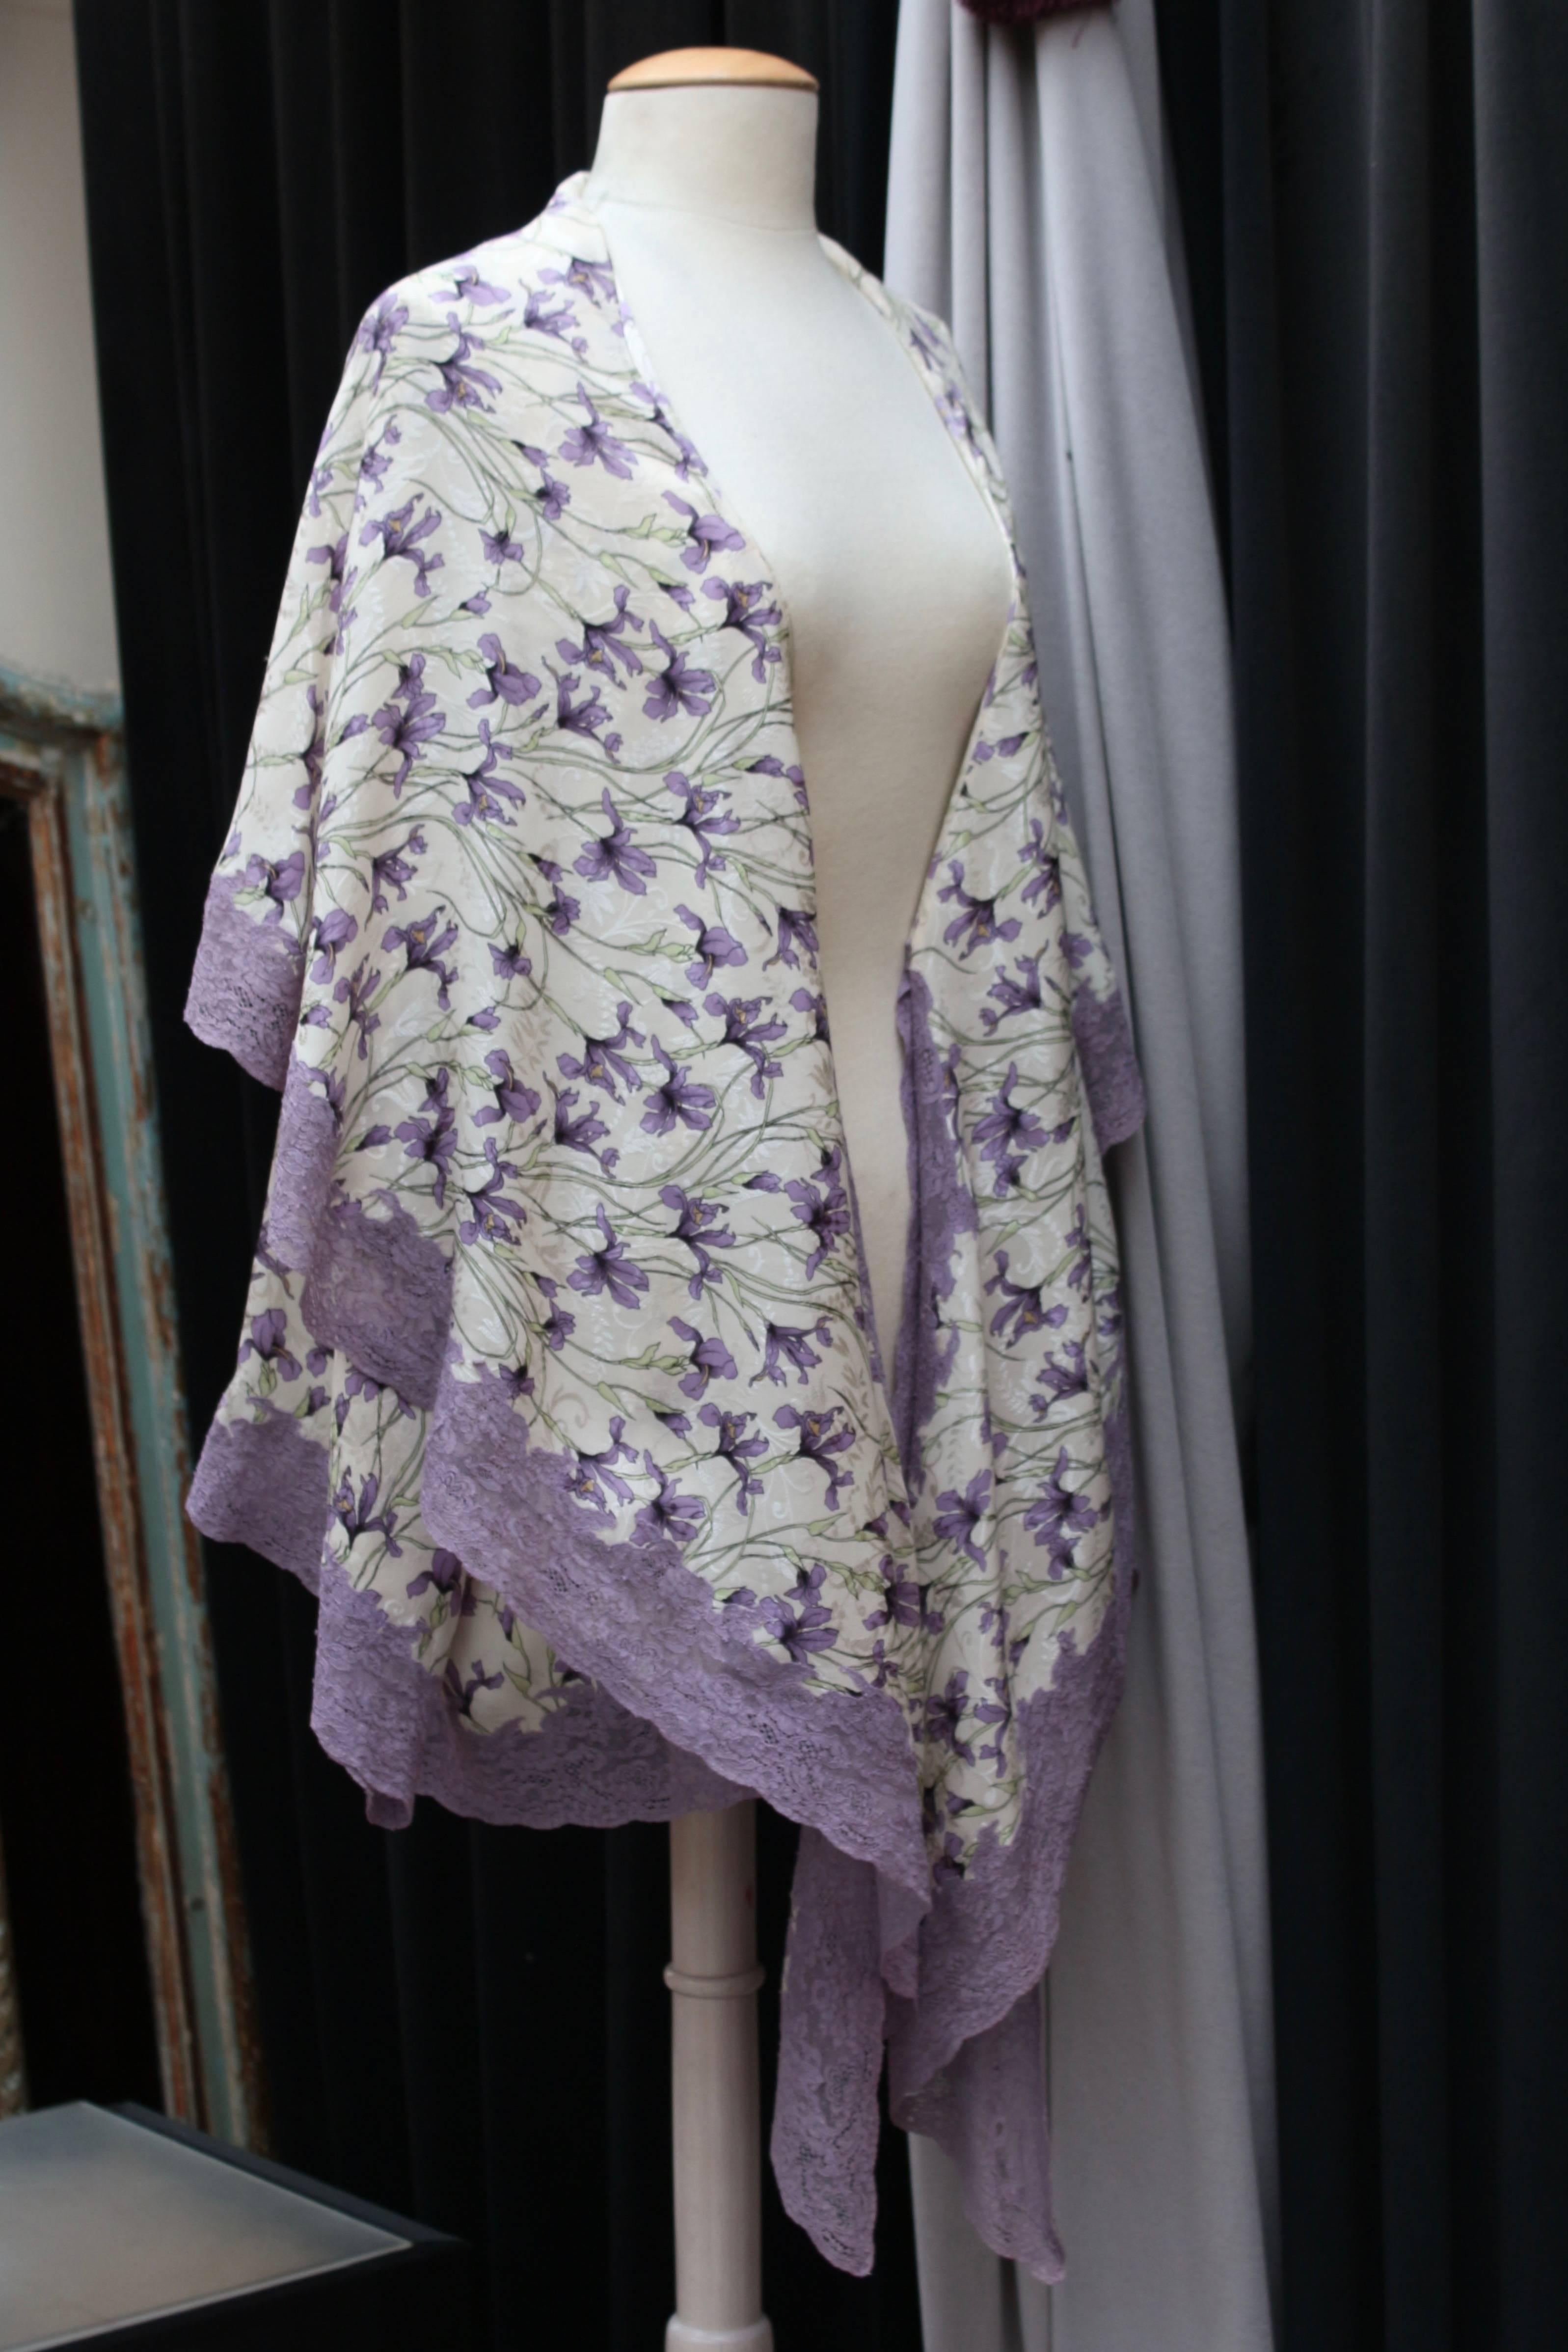 Gray Christian Dior silk “Kimono” style with floral pattern negligee